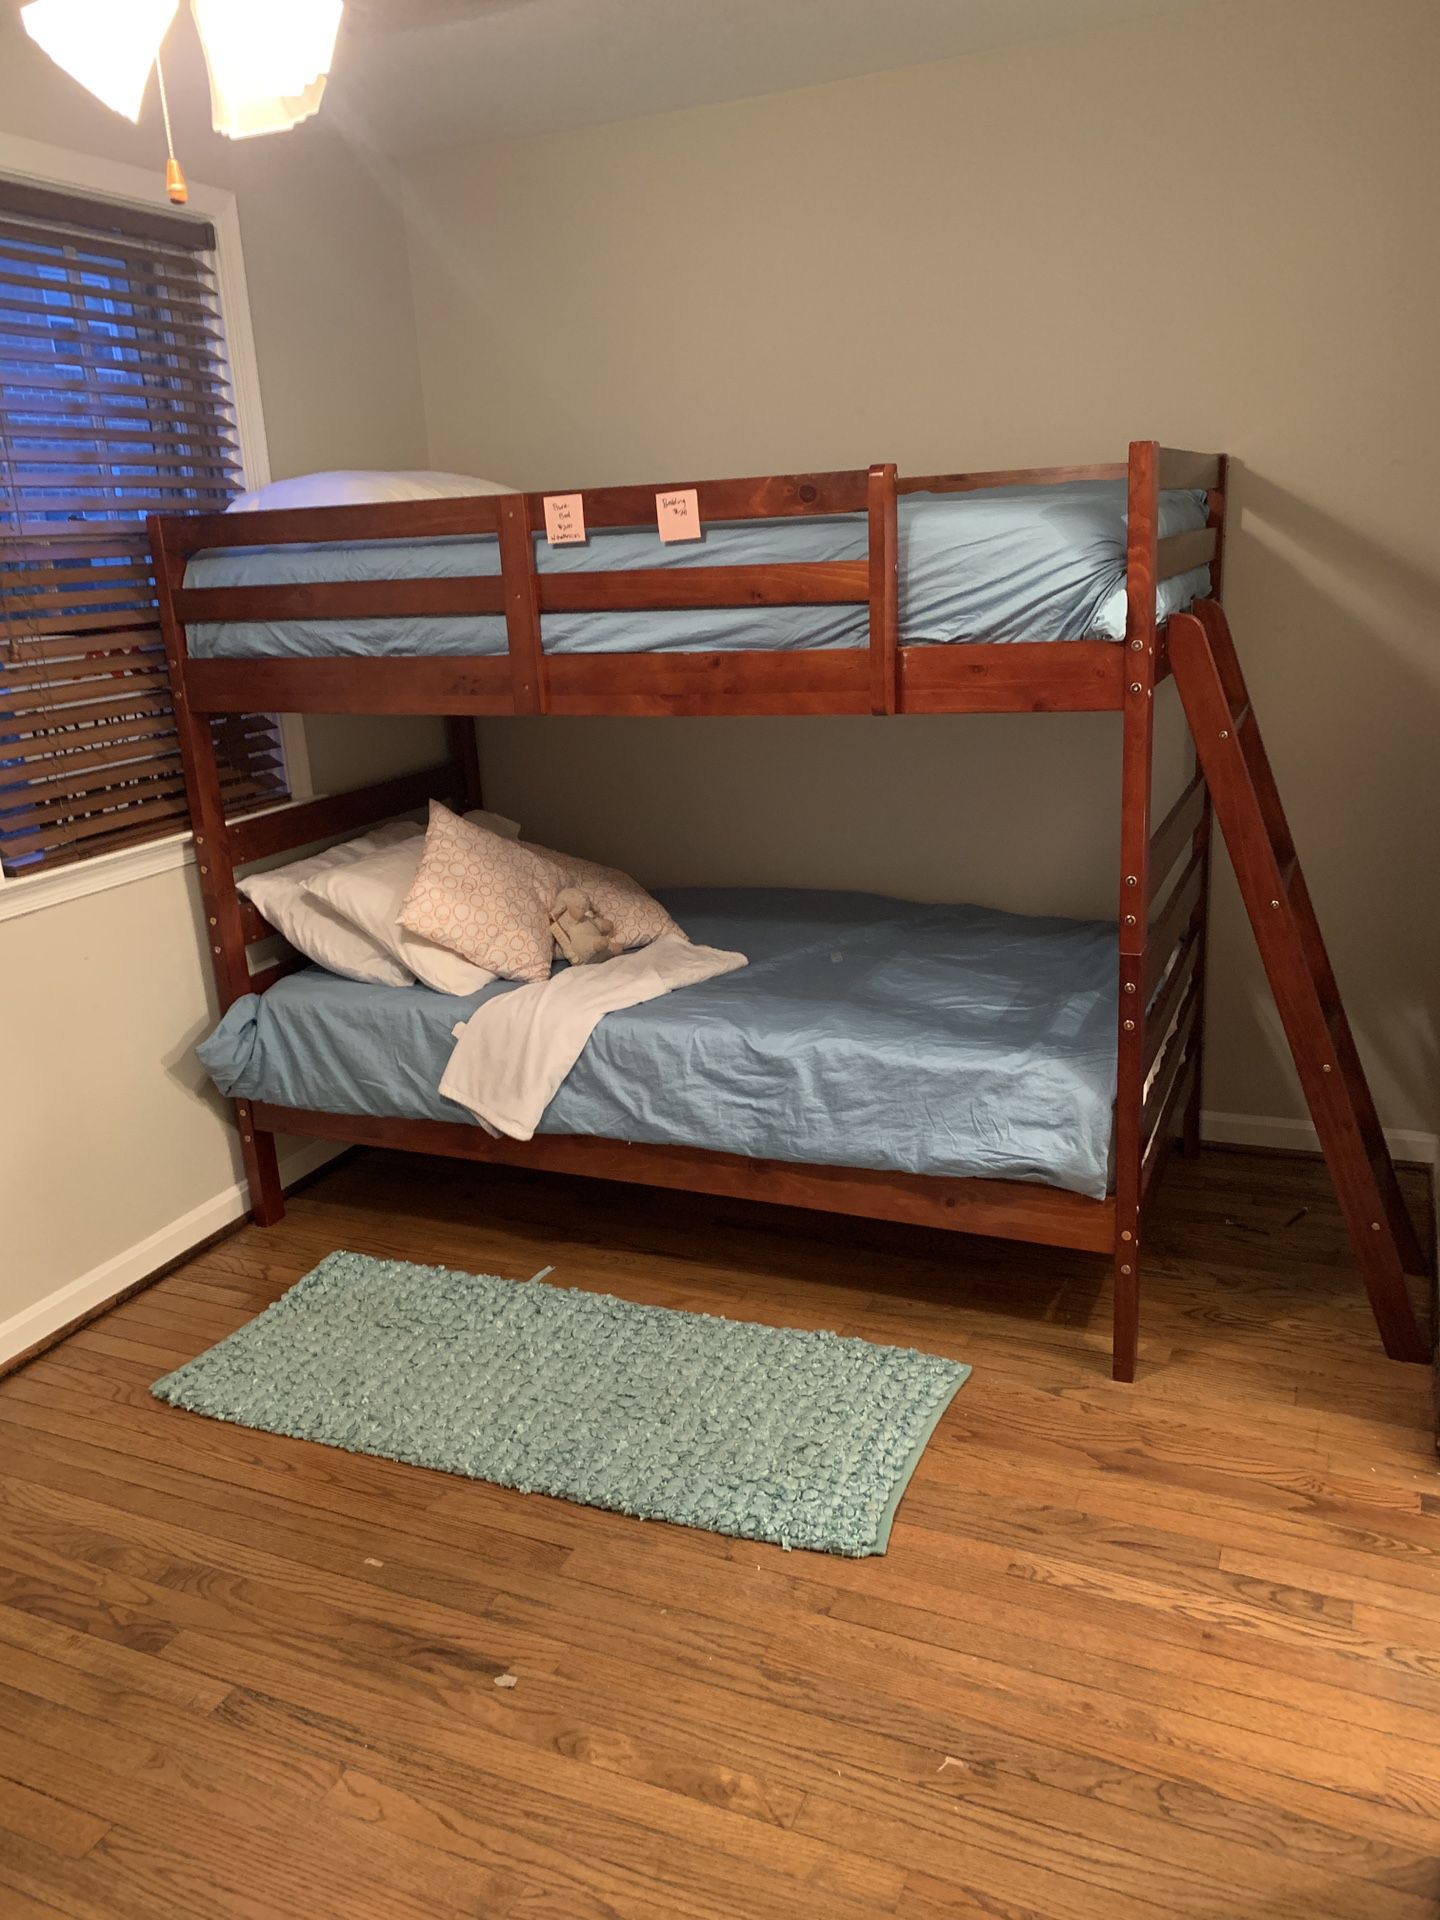 Bunk bed set with mattresses and bedding